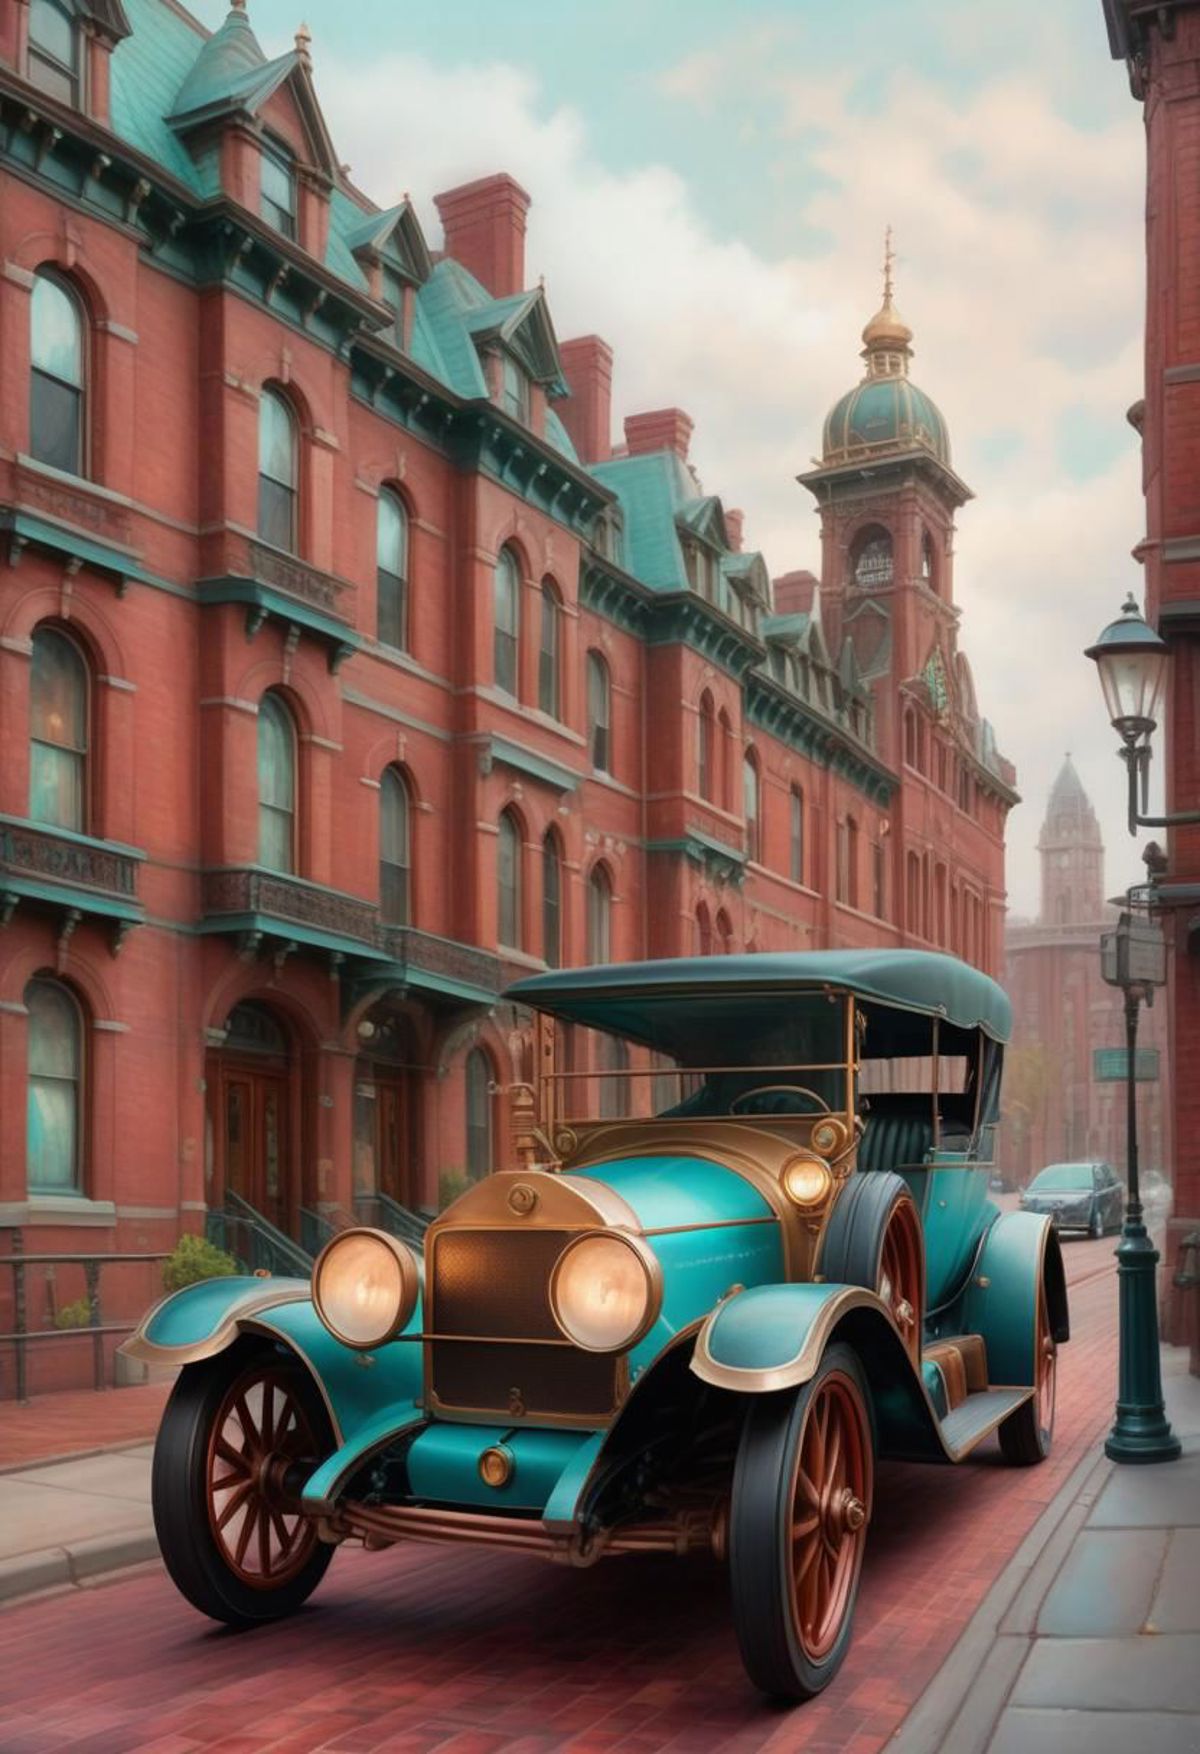 A vintage blue car is parked on a city street in front of a building.